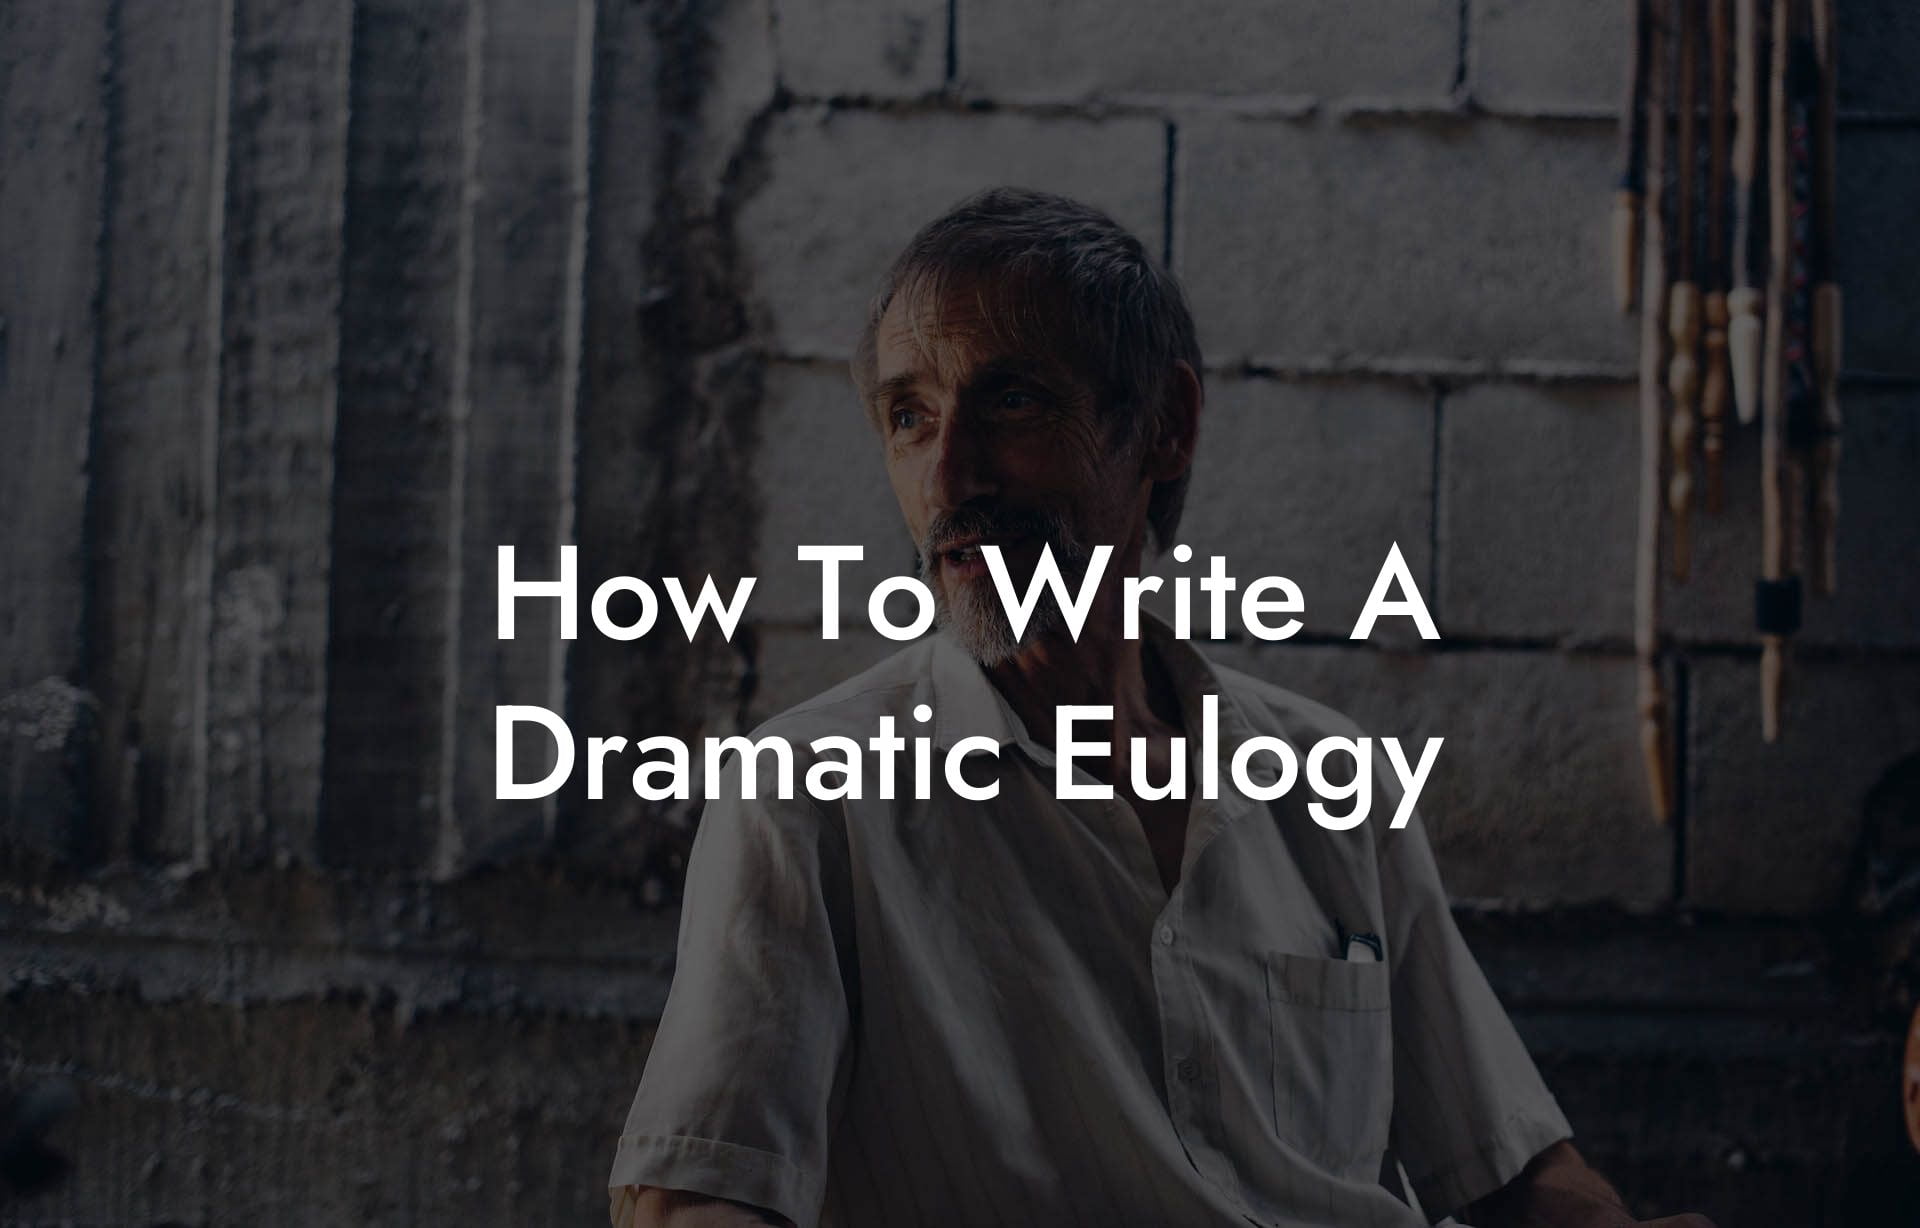 How To Write A Dramatic Eulogy